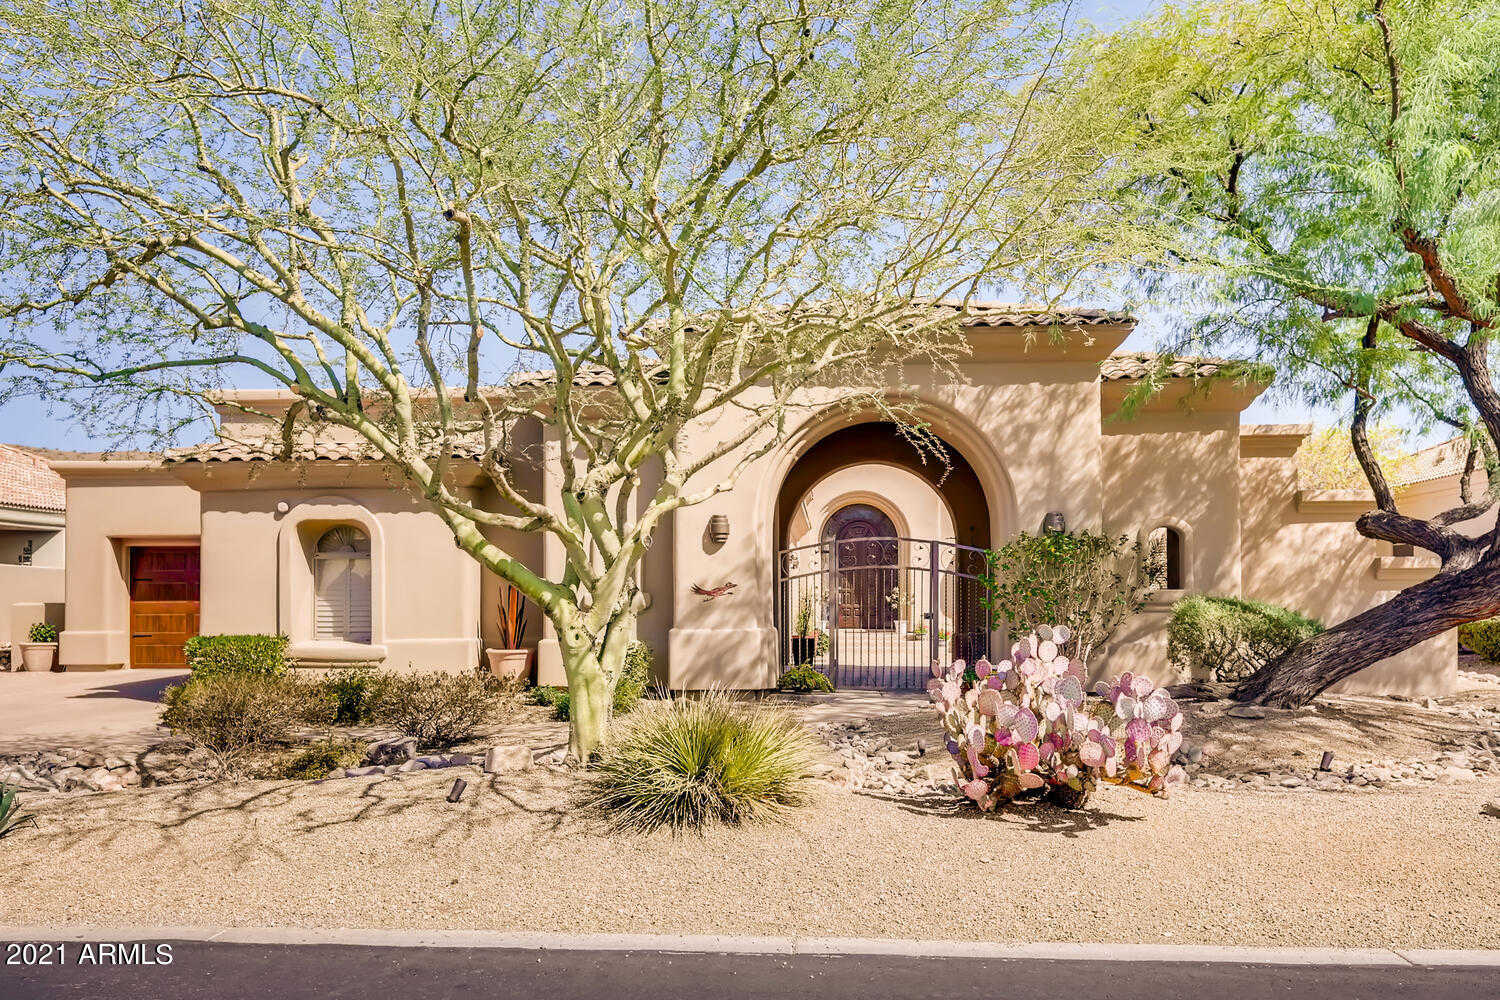 $1,575,000 - 3Br/4Ba - Home for Sale in Ancala, Scottsdale